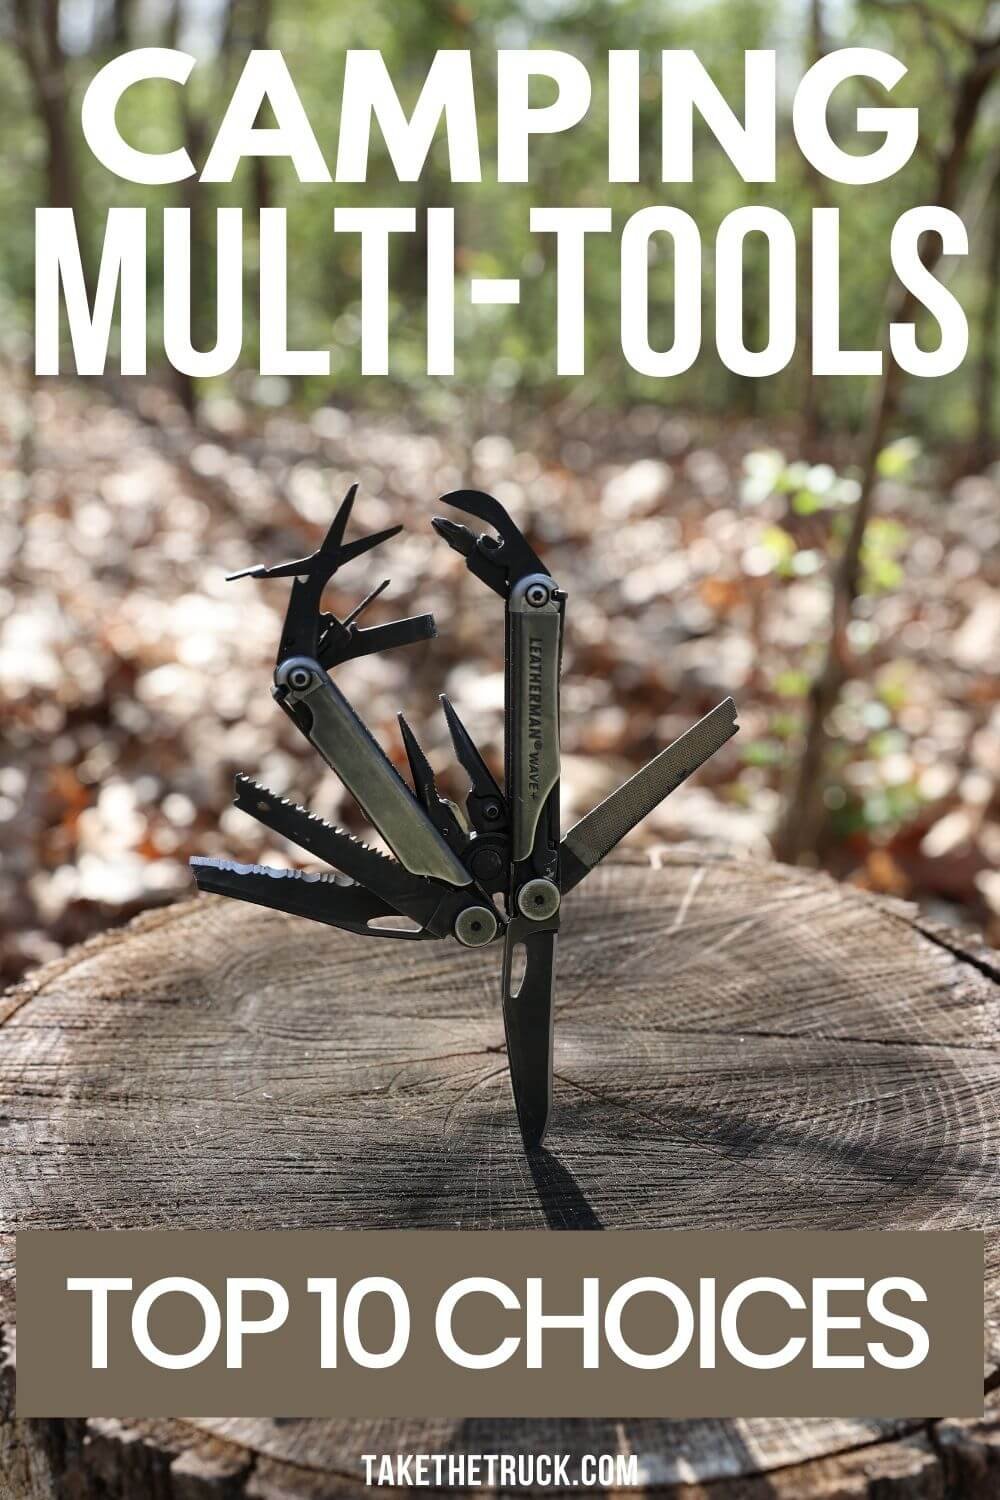 10 best camping multi tool suggestions and multitools for everyday carry. Multi tool knife suggestions, leatherman multitool for everyday carry, and multitools for camping gear.